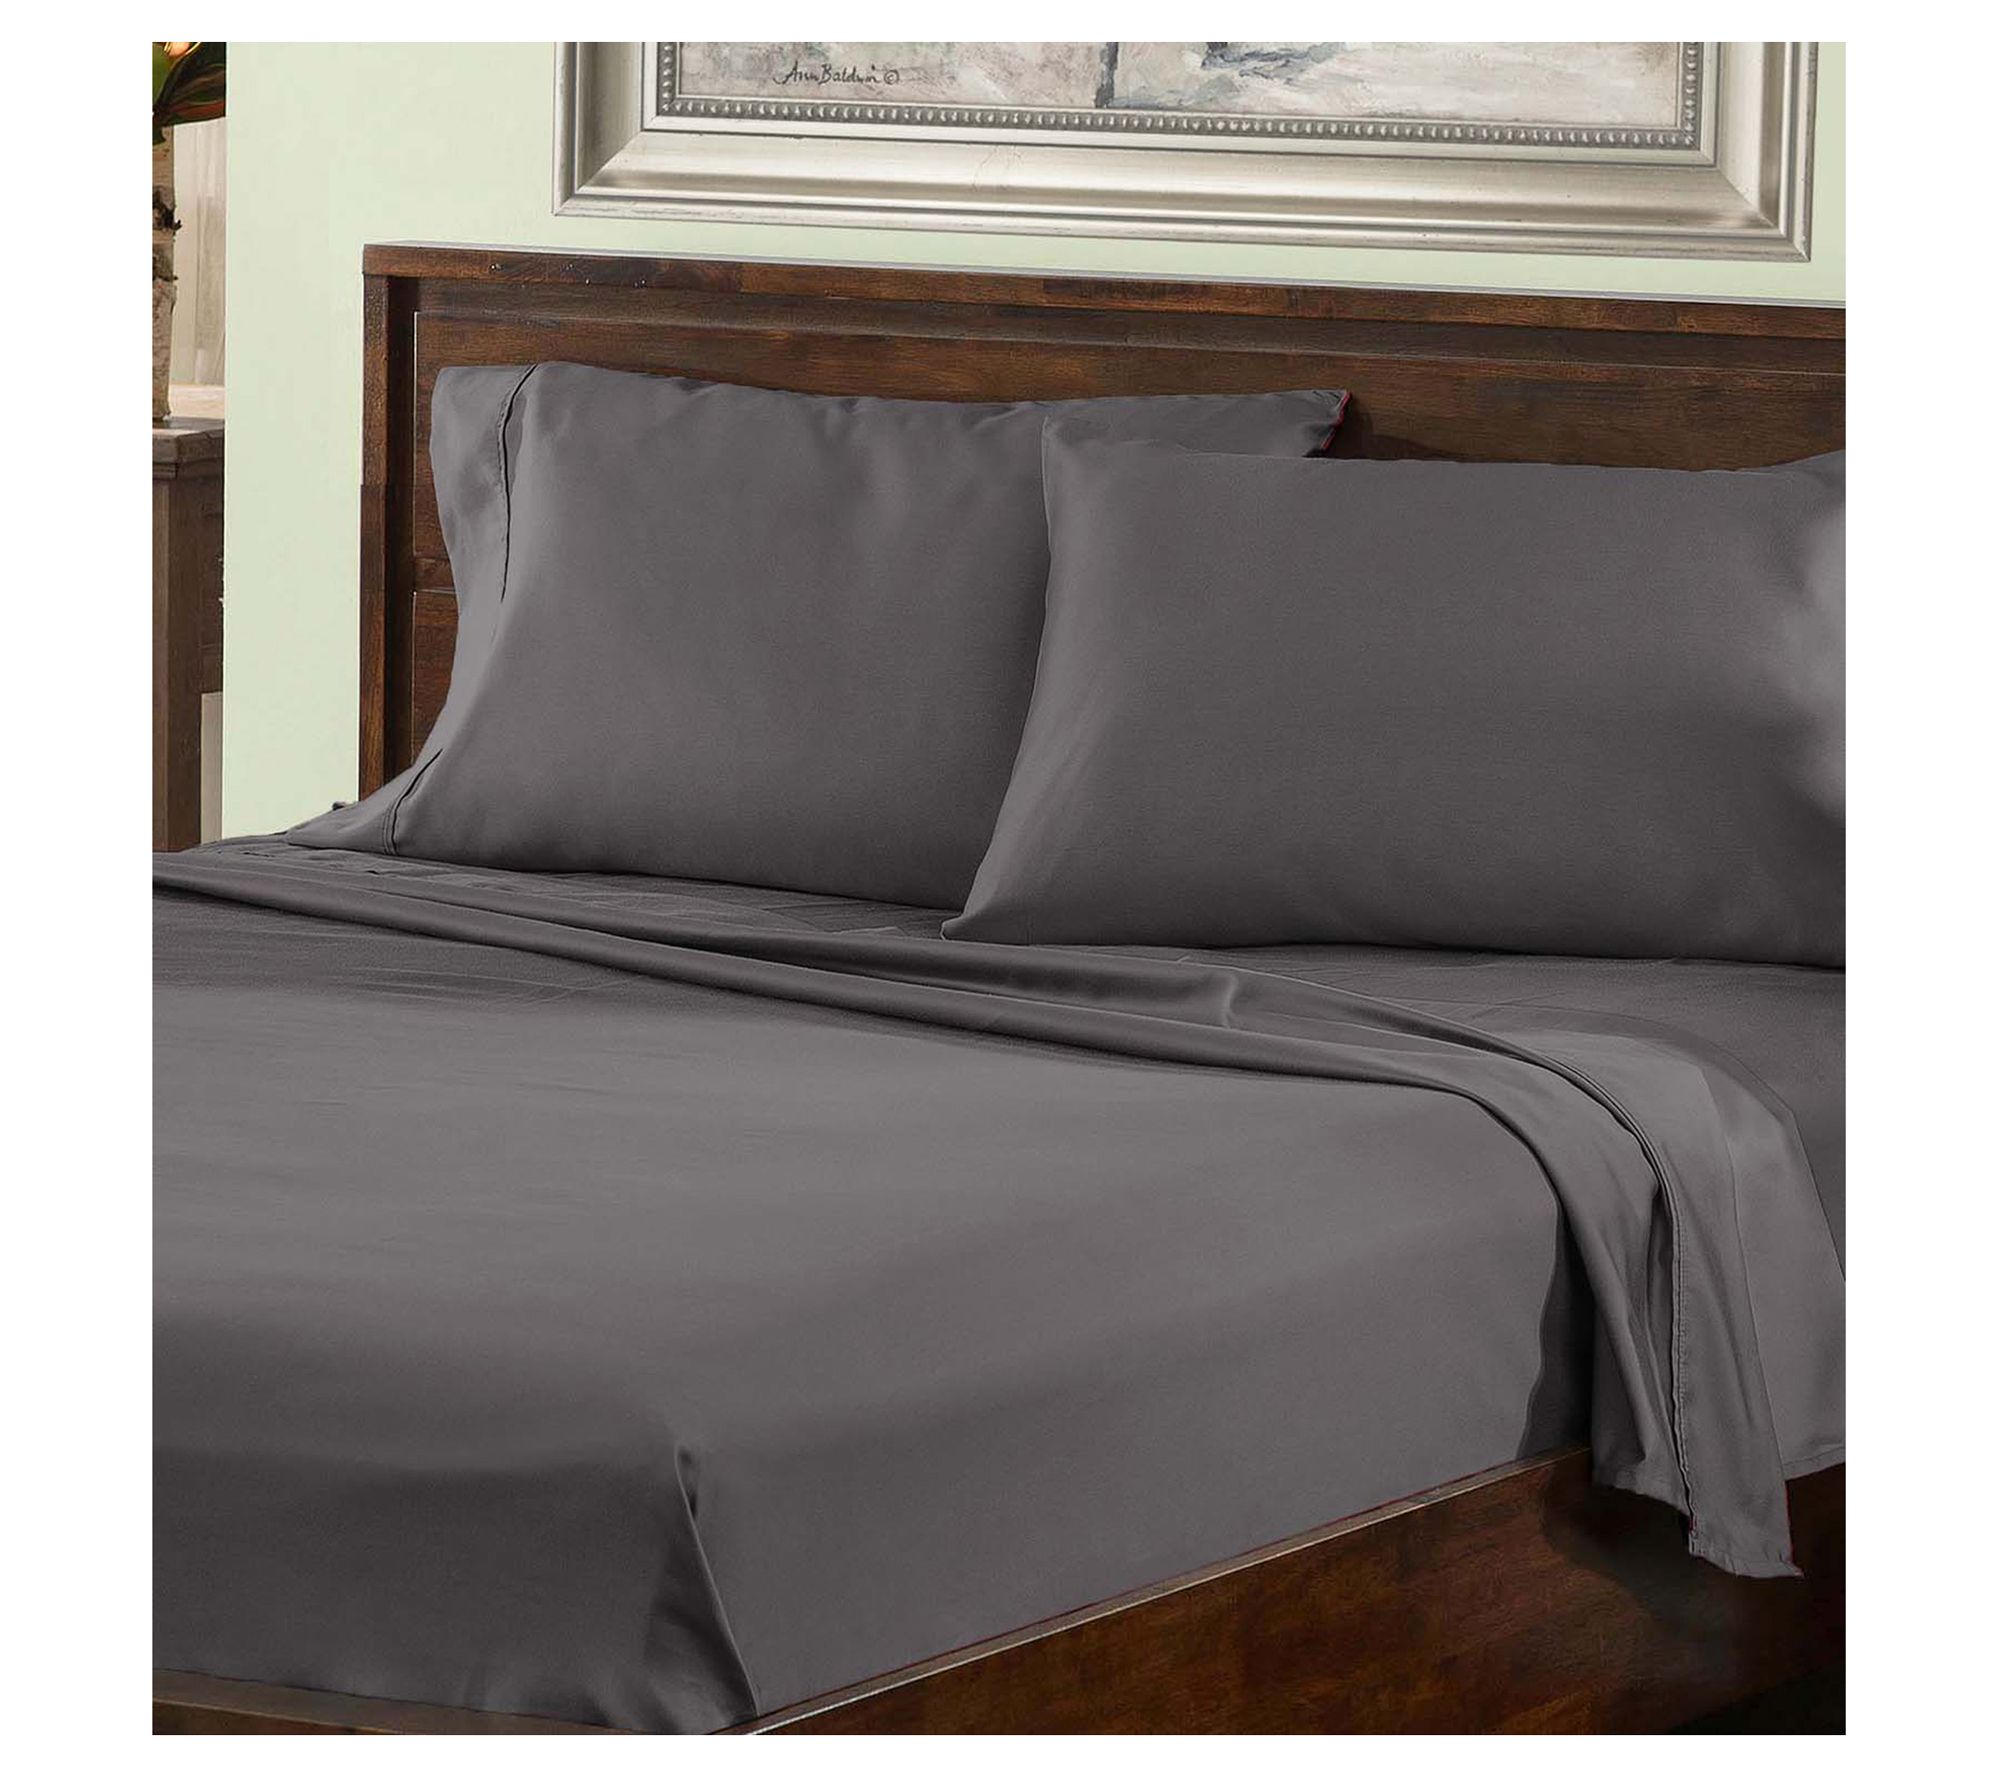 Superior Egyptian Cotton 1500 Thread Count Bed Sheet Set - On Sale